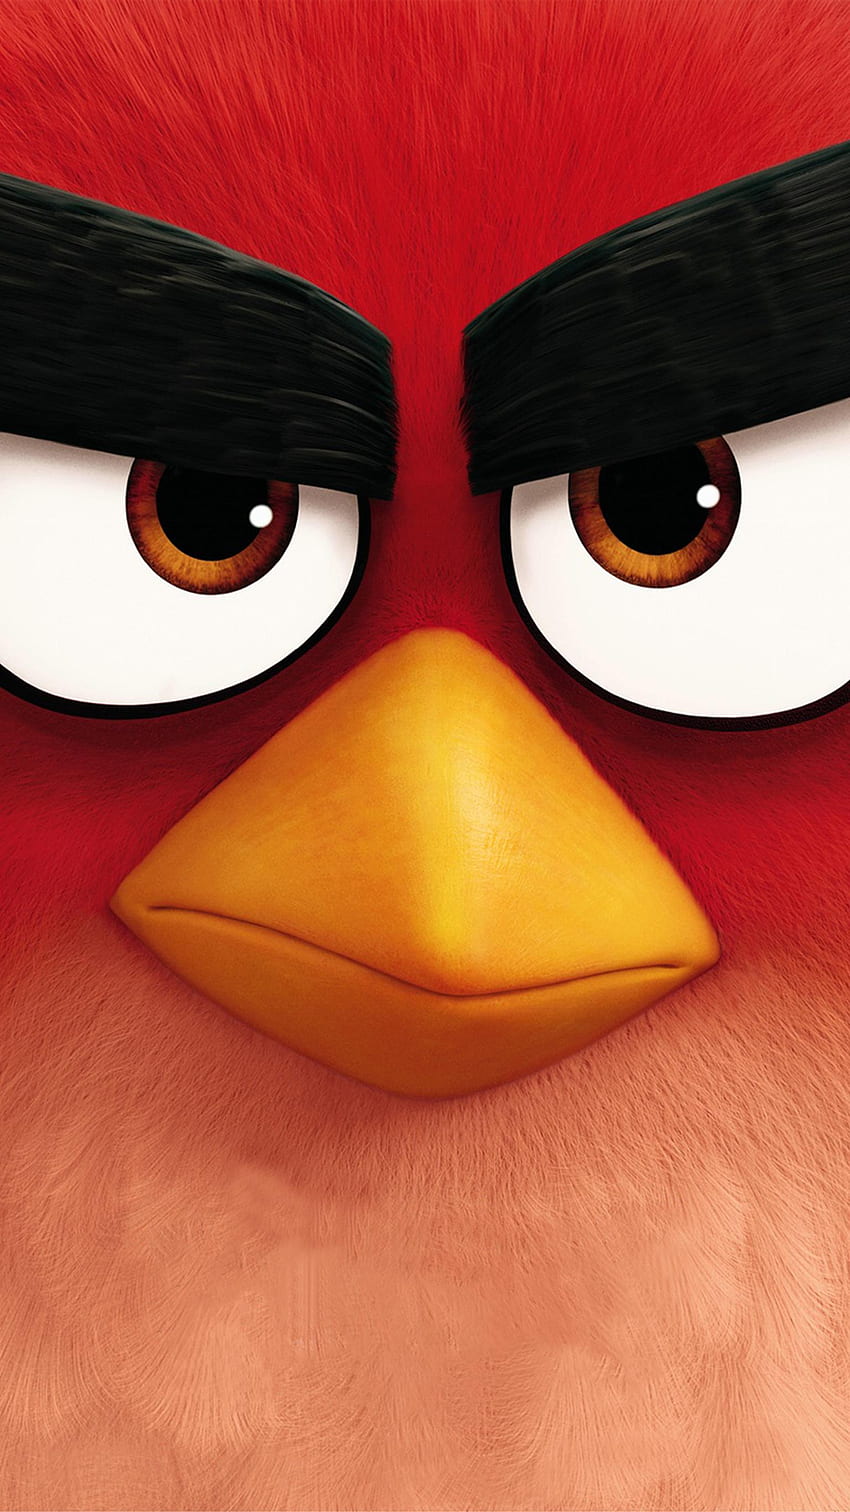 The Angry Birds Movie (2016) Phone, Angry Birds 3D HD phone wallpaper